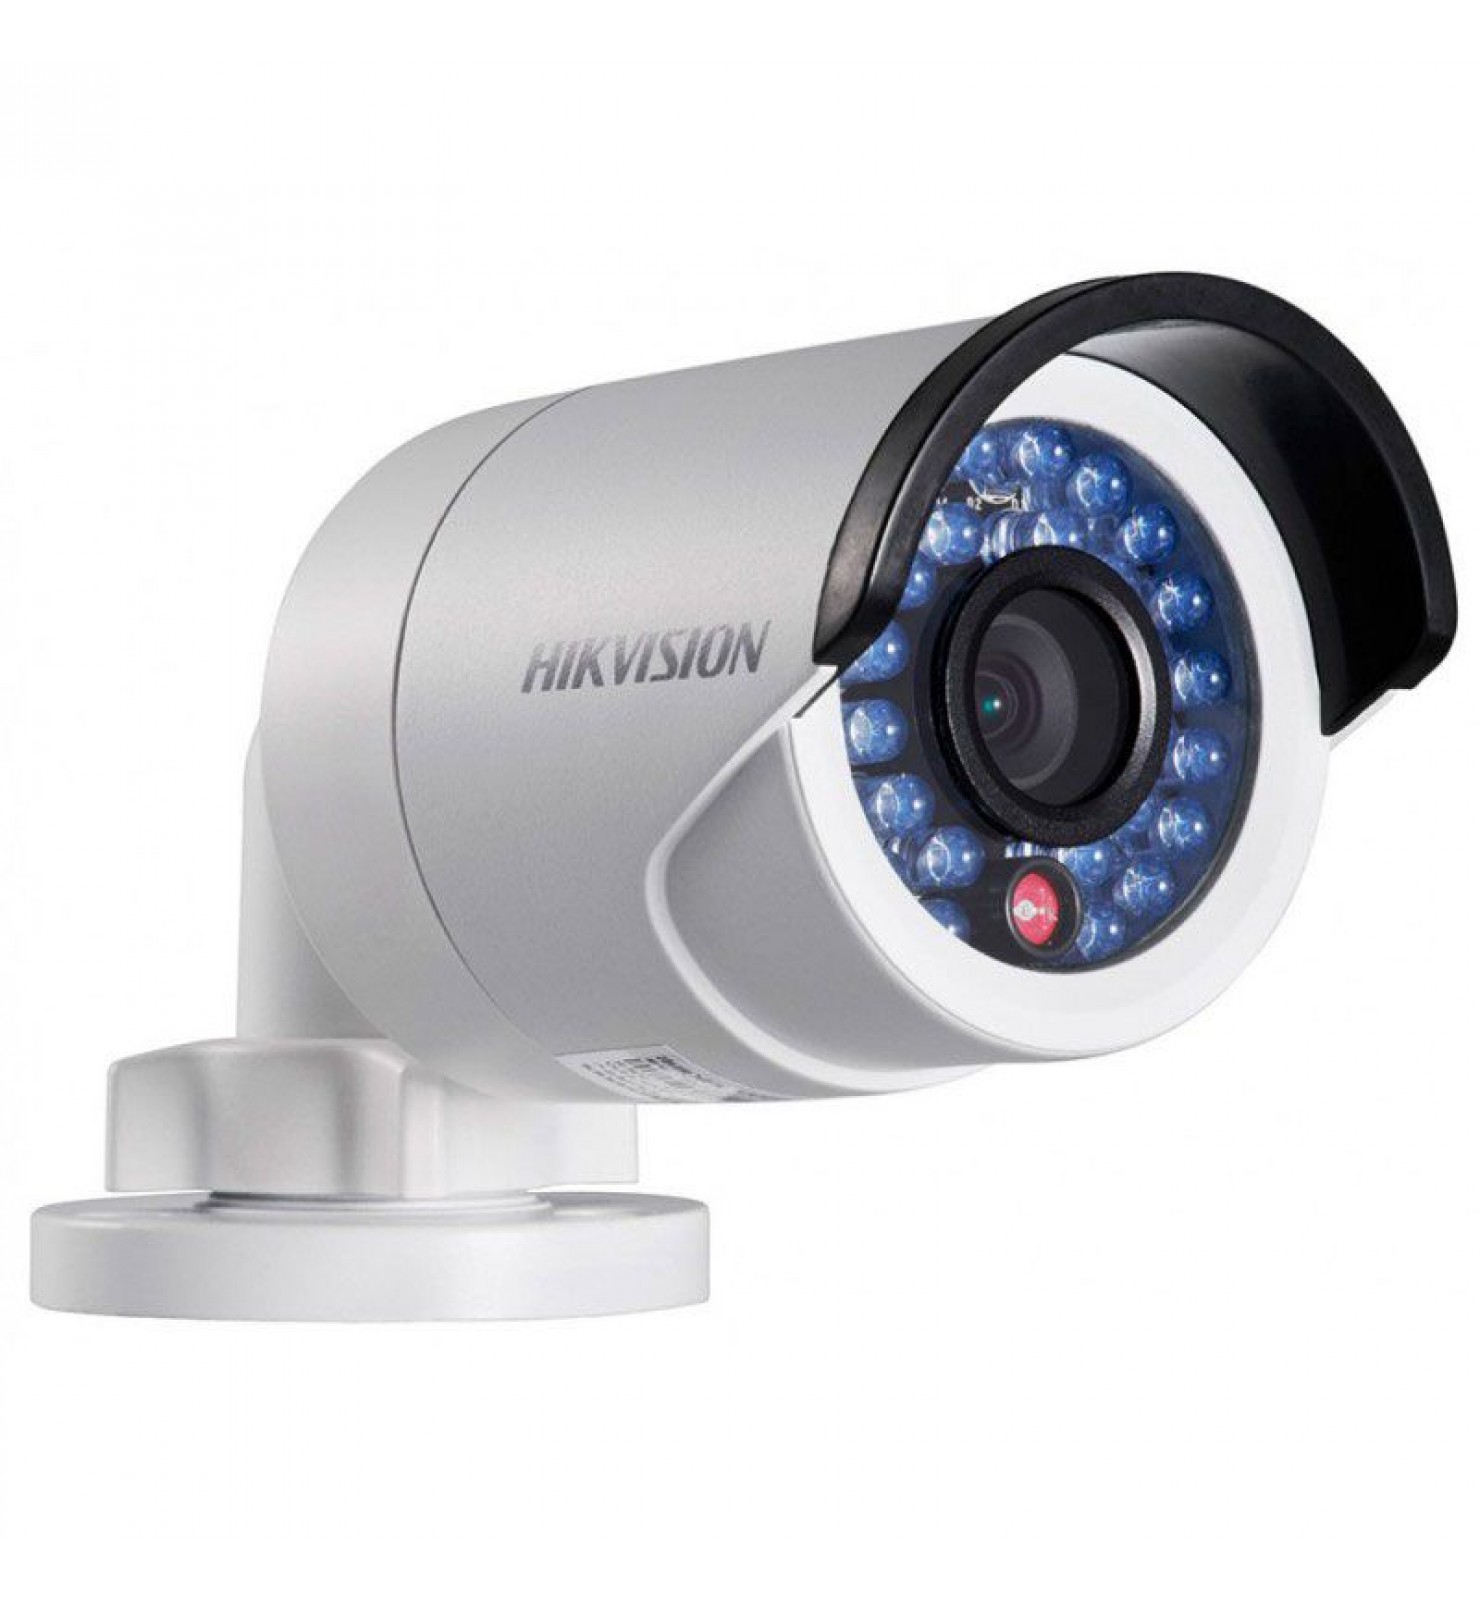 Камера Hikvision DS-2CD2042WD-I